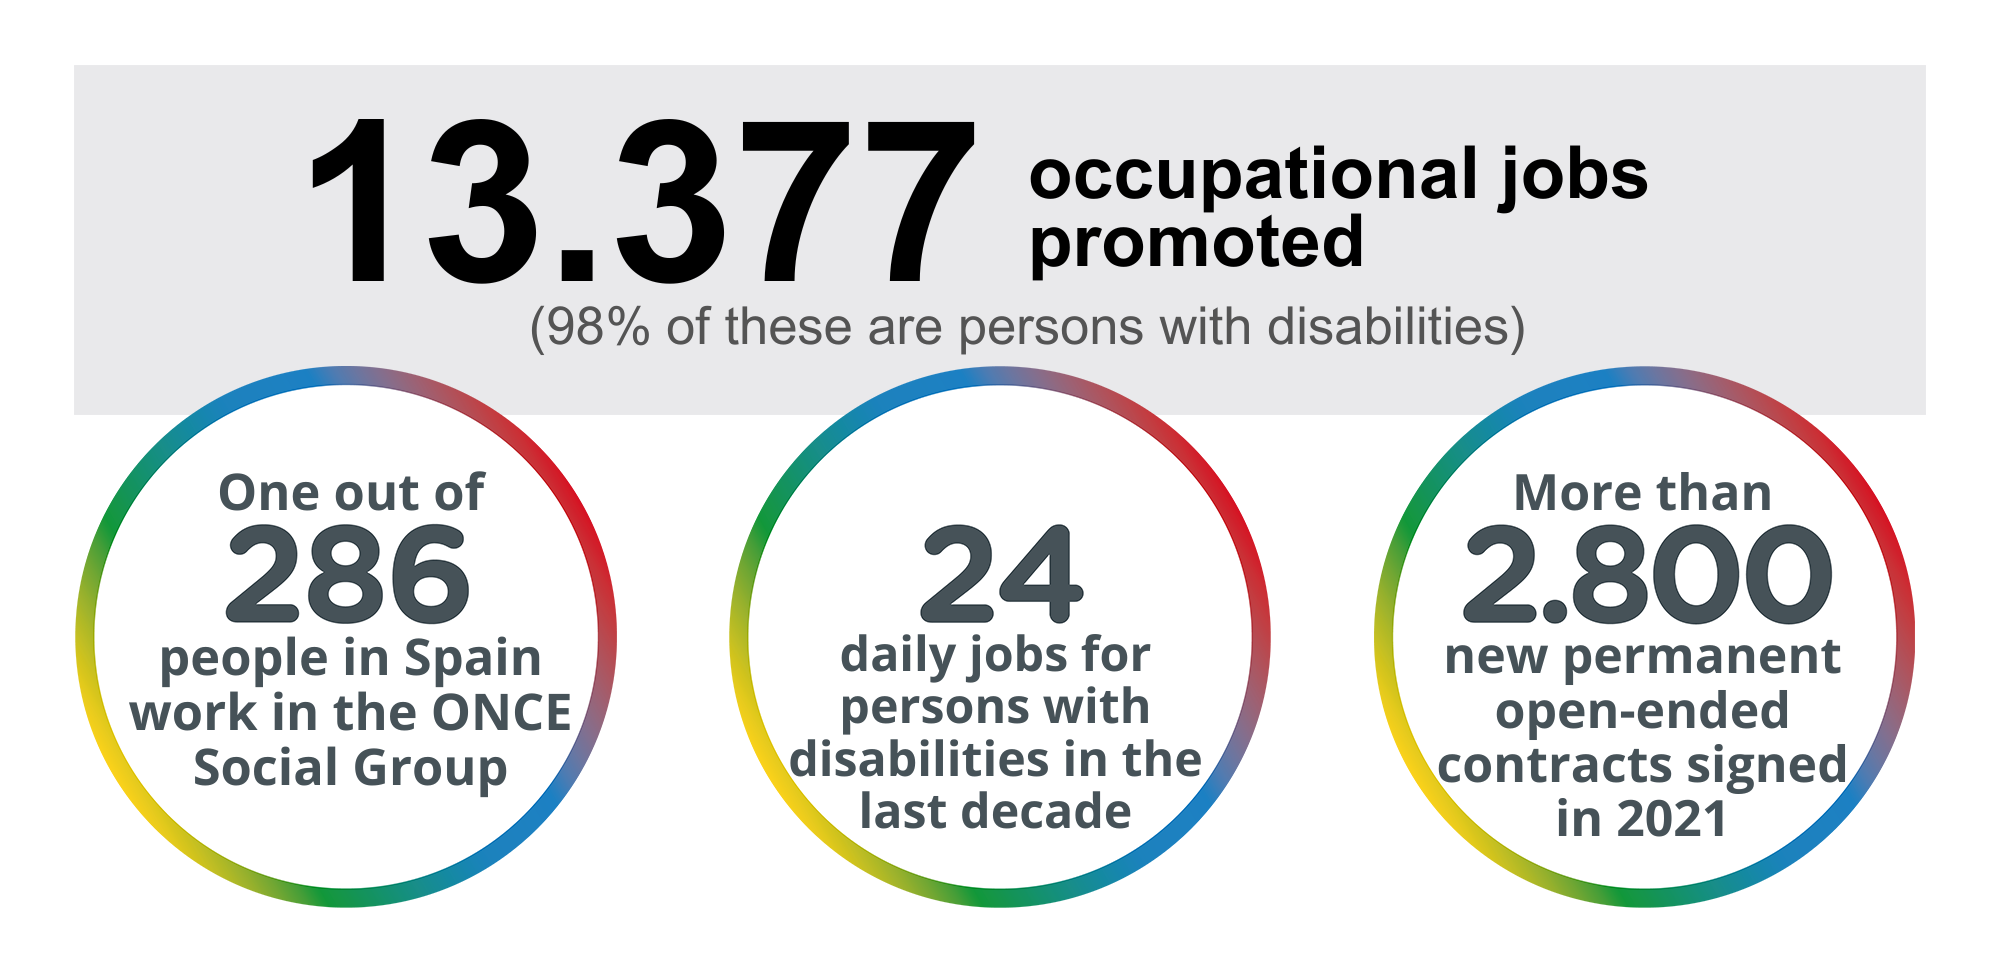 13,377 occupational jobs promoted (98% of these are persons with disabilities) One out of 286 people in Spain work in the ONCE Social Group 24 daily jobs for persons with disabilities in the last decade More than 2,800 new permanent open-ended contracts signed in 2021